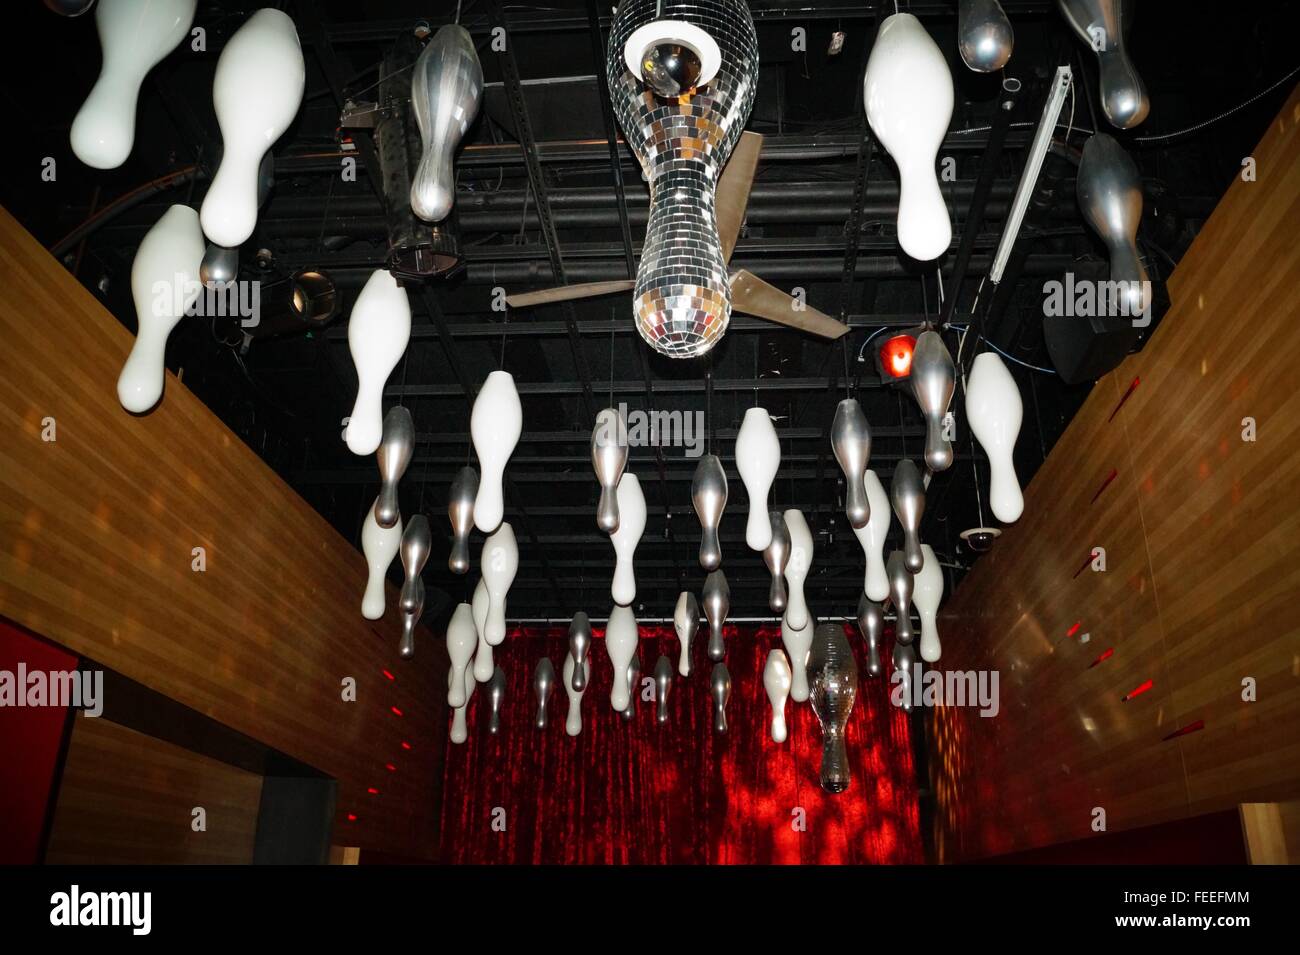 Bowling pins hanging from the ceiling at a bowling club in Manhattan. Stock Photo